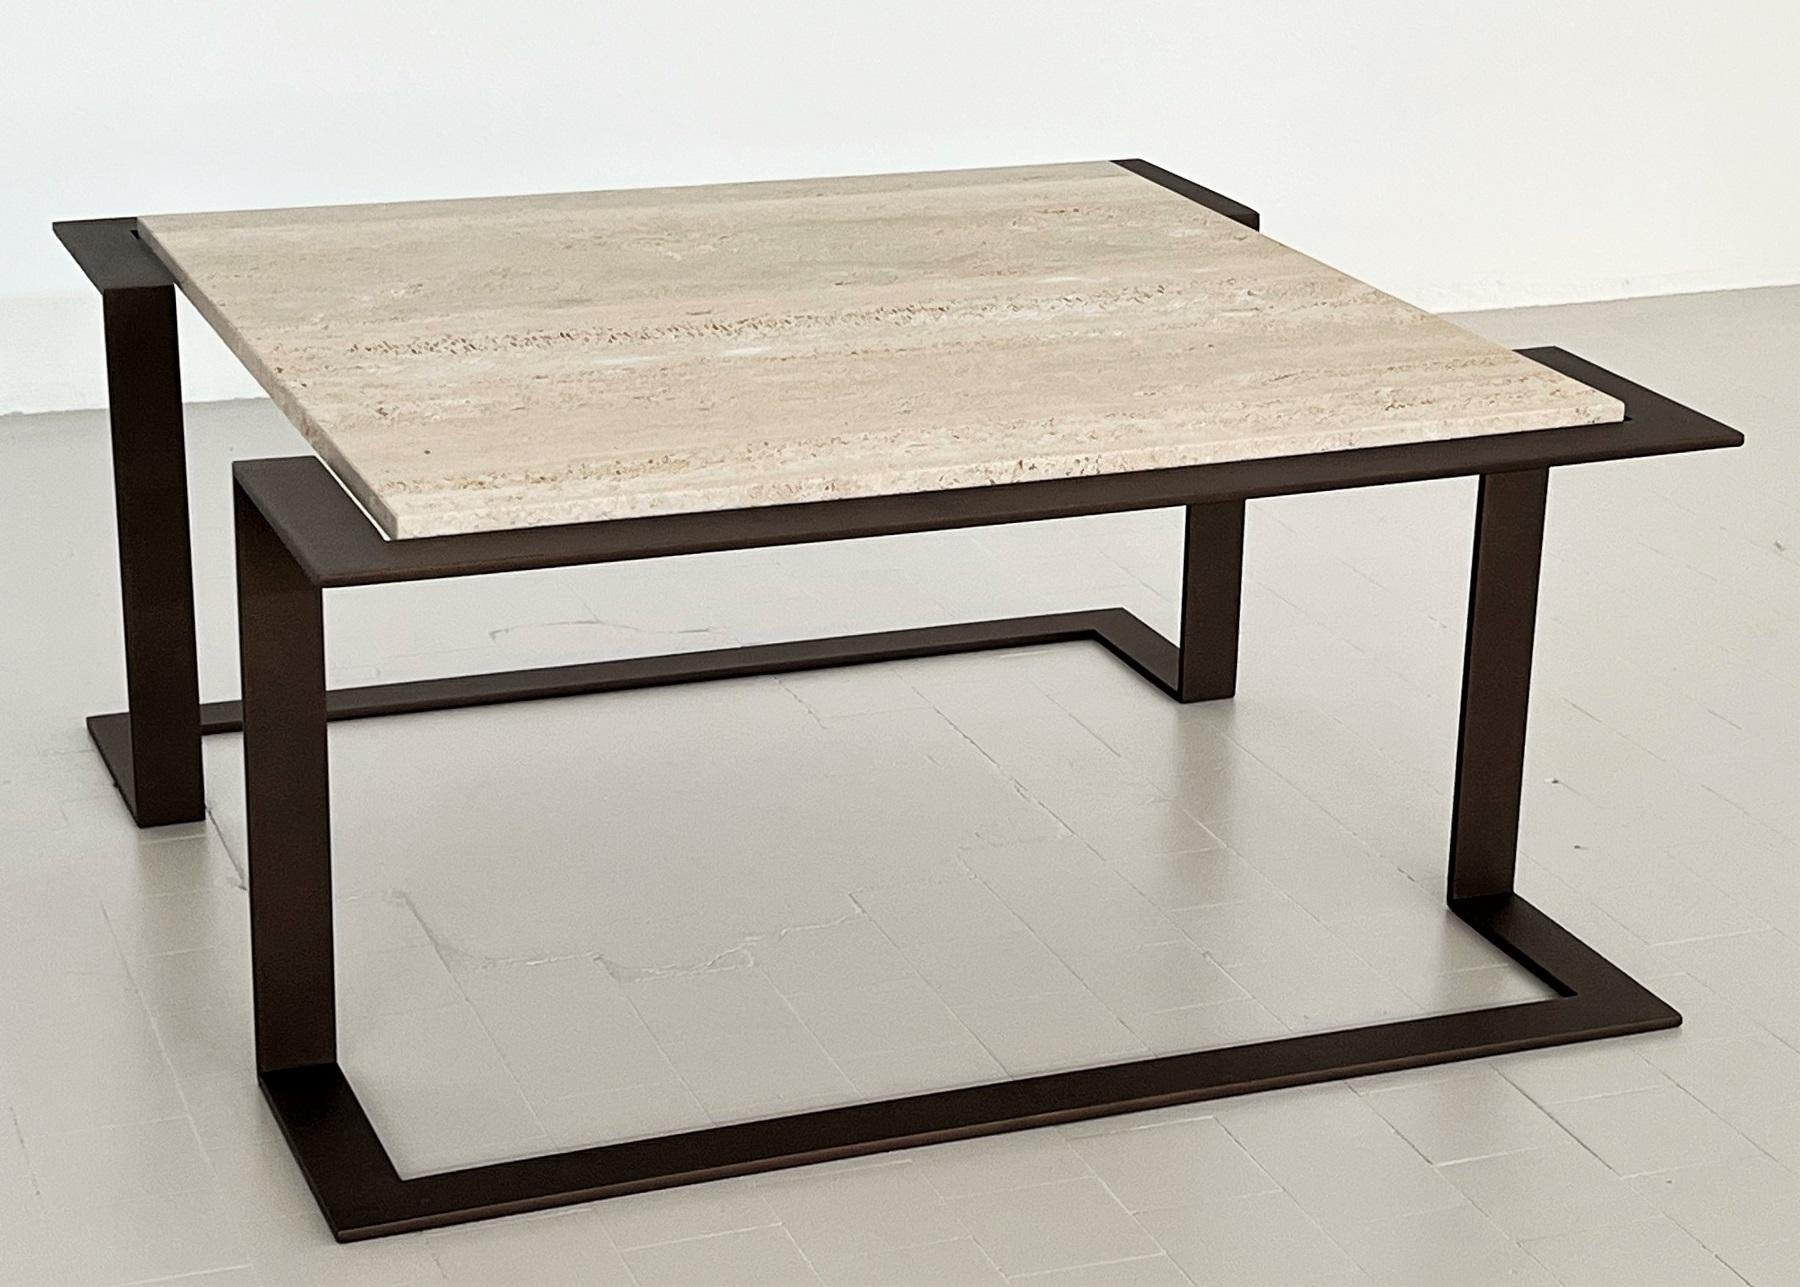 Italian Mid-Century Travertine Marble Coffee Table and Metal Base, 1970 For Sale 7